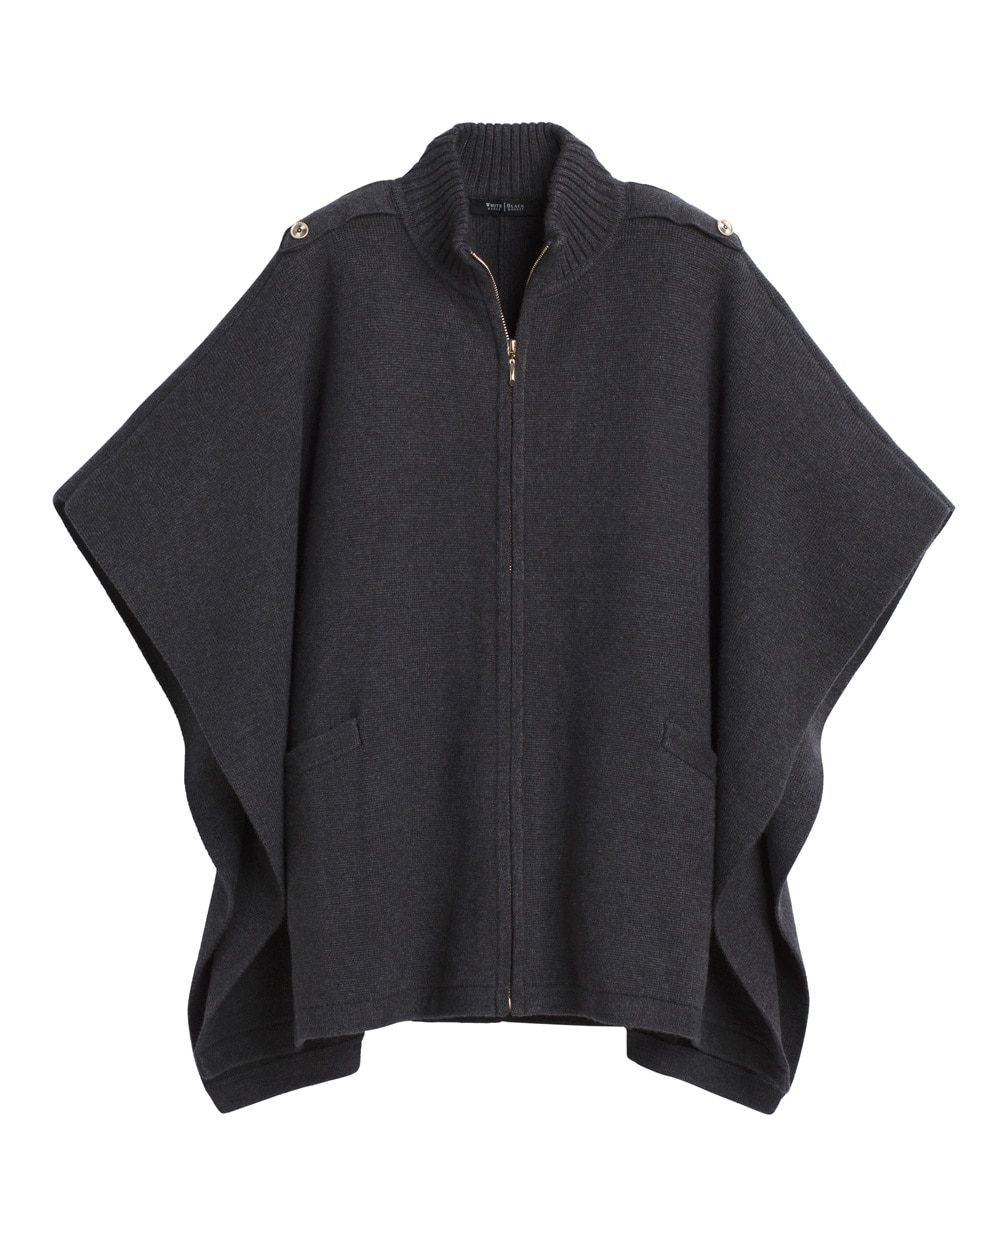 Sweater Cape - Shop Women's New Arrivals Collection - New Styles ...